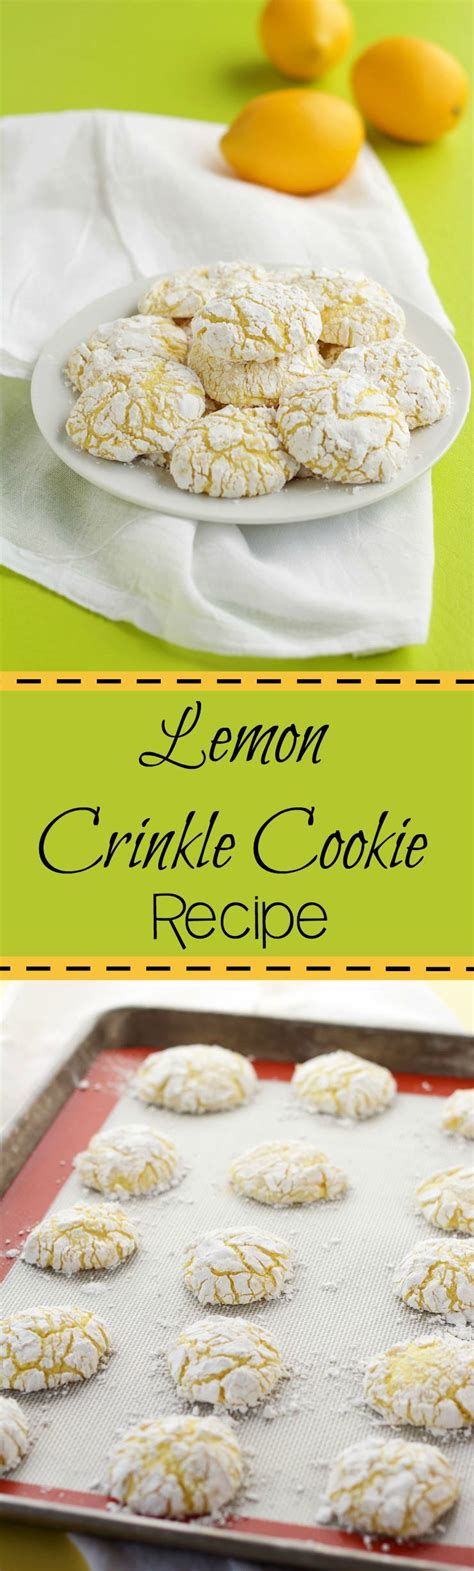 These easy lemony butter cookies gets their delicious crumbly texture from the use of confectioners sugar, and are topped with a sweet lemon glaze. Lemon Crinkle Cookies | Recipe | Lemon crinkle cookies ...